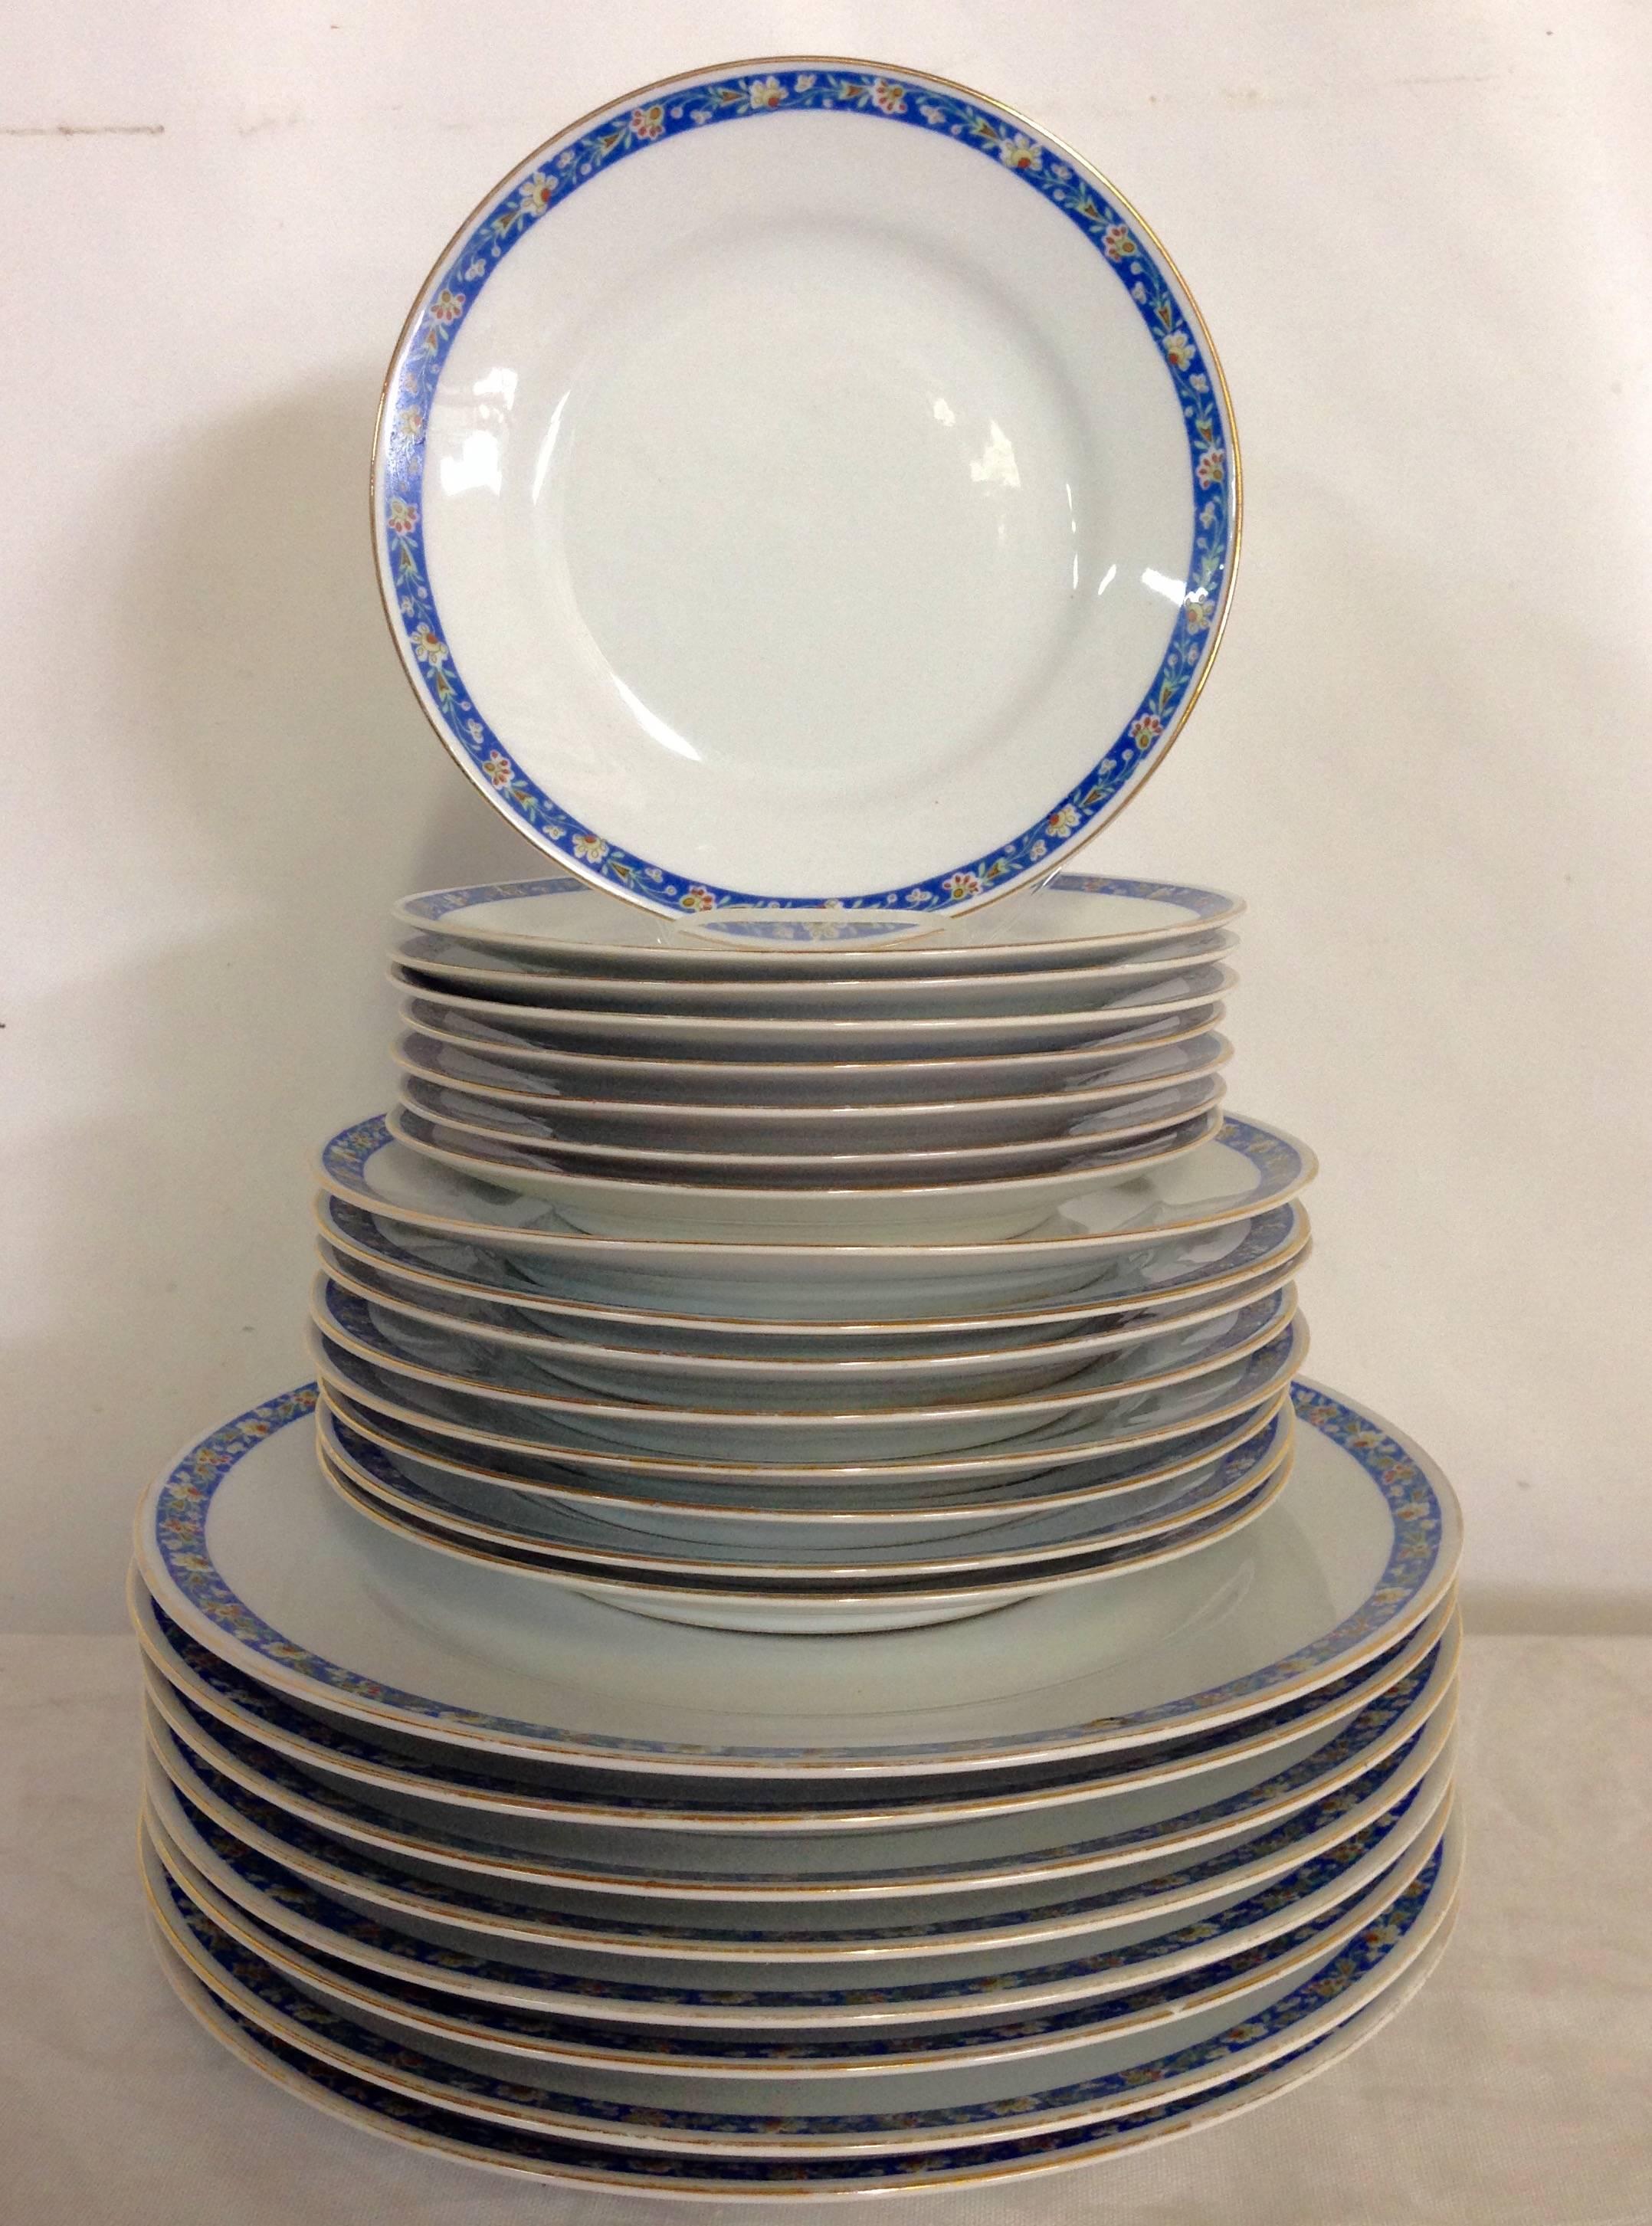 Mid-Century Japanese Morimura Porcelain dinnerware set of 24 pieces. This playful pattern features a bright white ground with a simple azure blue, yellow, white, red and green floral edge and a 22K gold rim detail.
Set consists of eight 3 piece